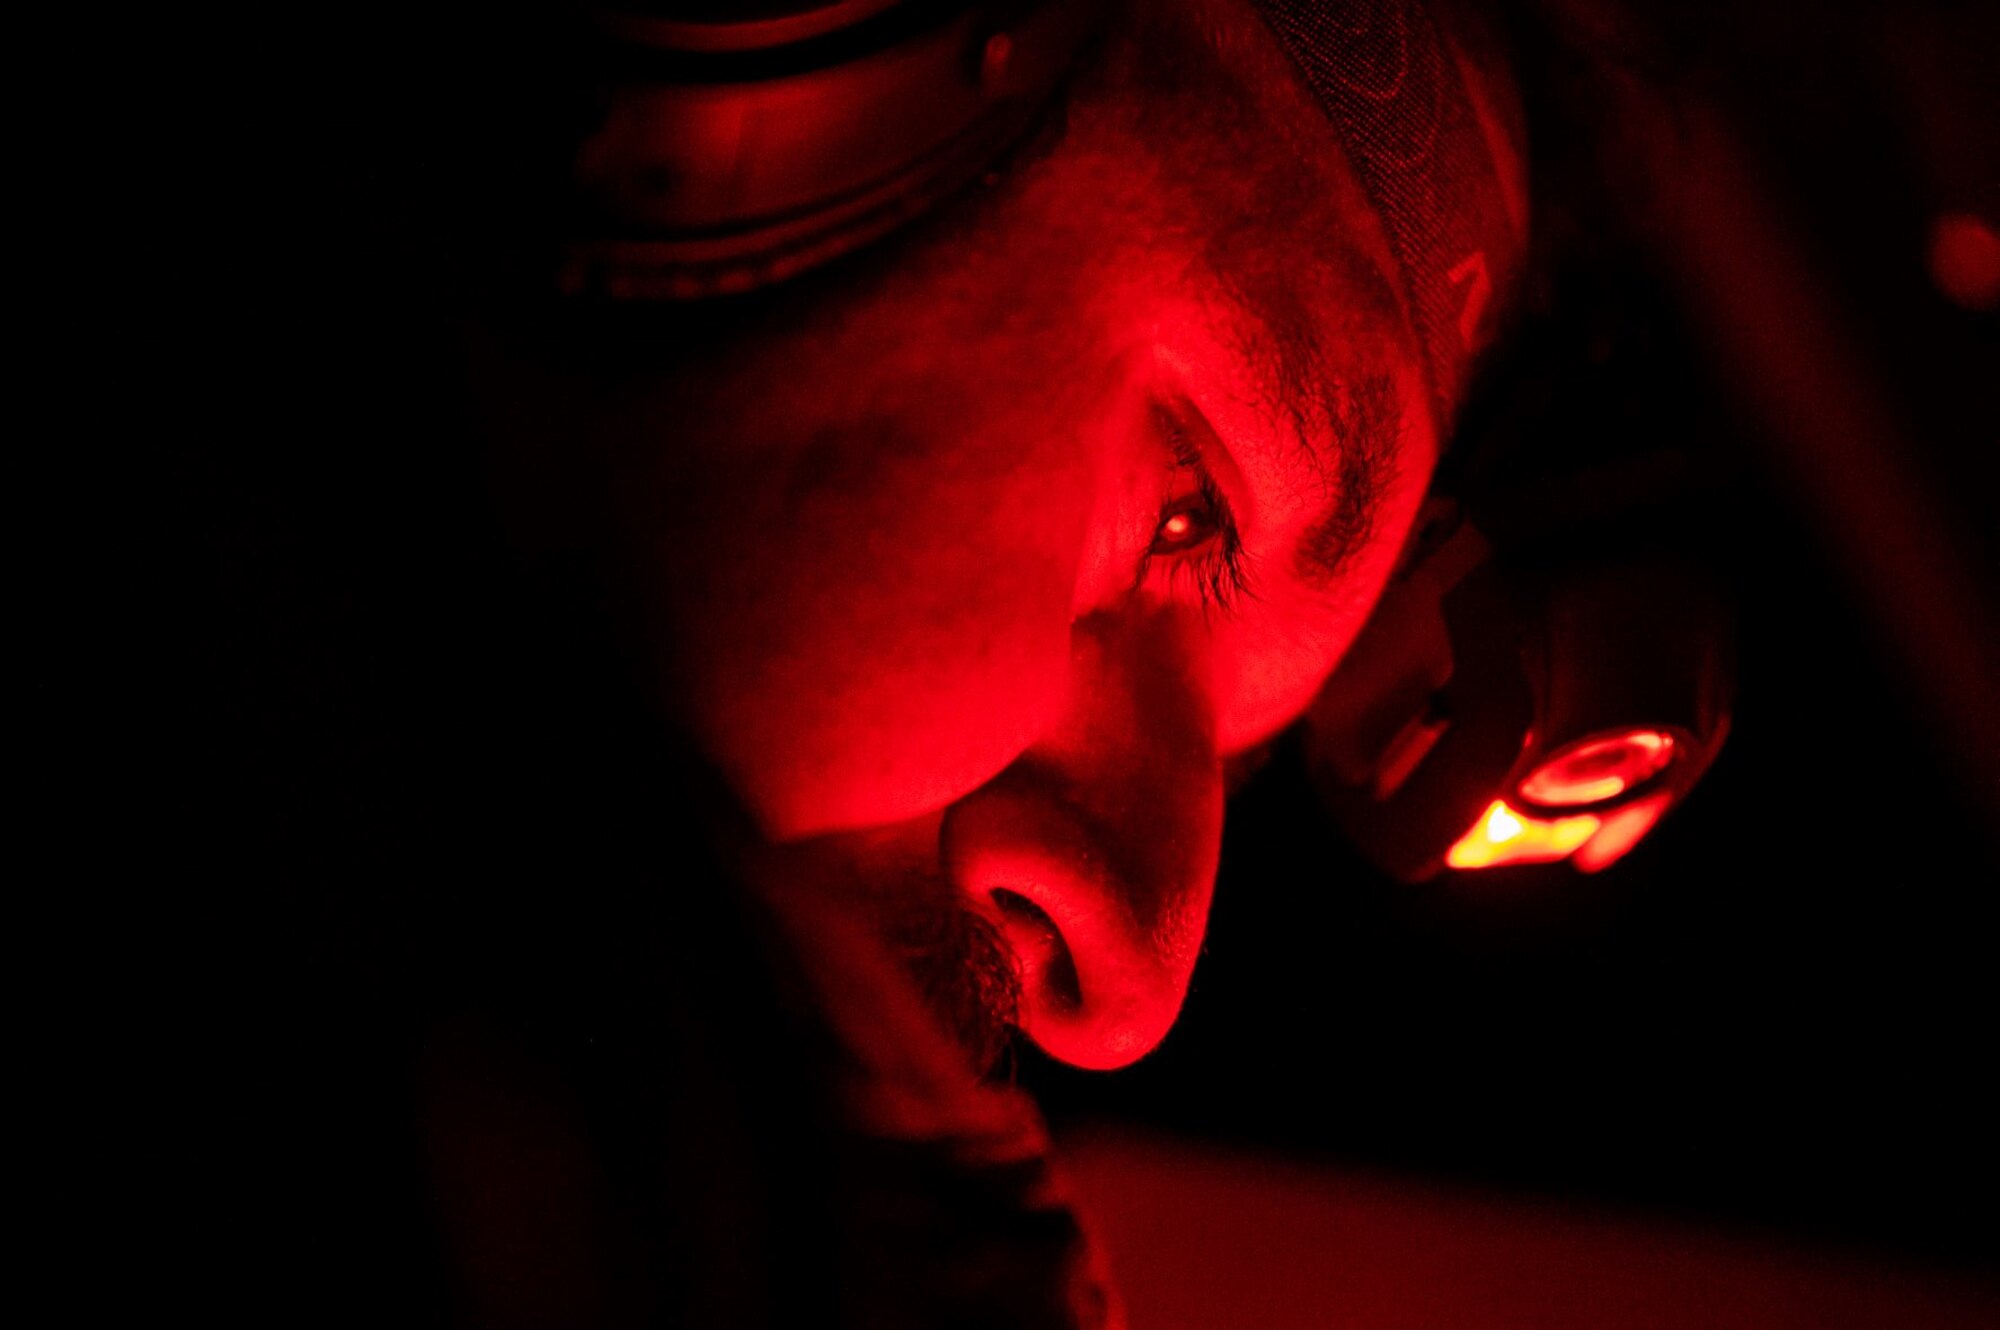 A U.S. Air Force B-52H Stratofortress aircrew member, assigned to the 20th Bomb Squadron, Barksdale Air Force Base, Louisiana, conducts checks during a Bomber Task Force mission, Sept. 9, 2021, over the Indo-Pacific region. The bombers are operating out of Andersen Air Force Base, Guam during their deployment. Andersen acts as a staging point for the B-52, allowing commanders to address a variety of global challenges through the engagement of the bomber. (U.S. Air Force photo by Staff Sgt. Devin M. Rumbaugh)